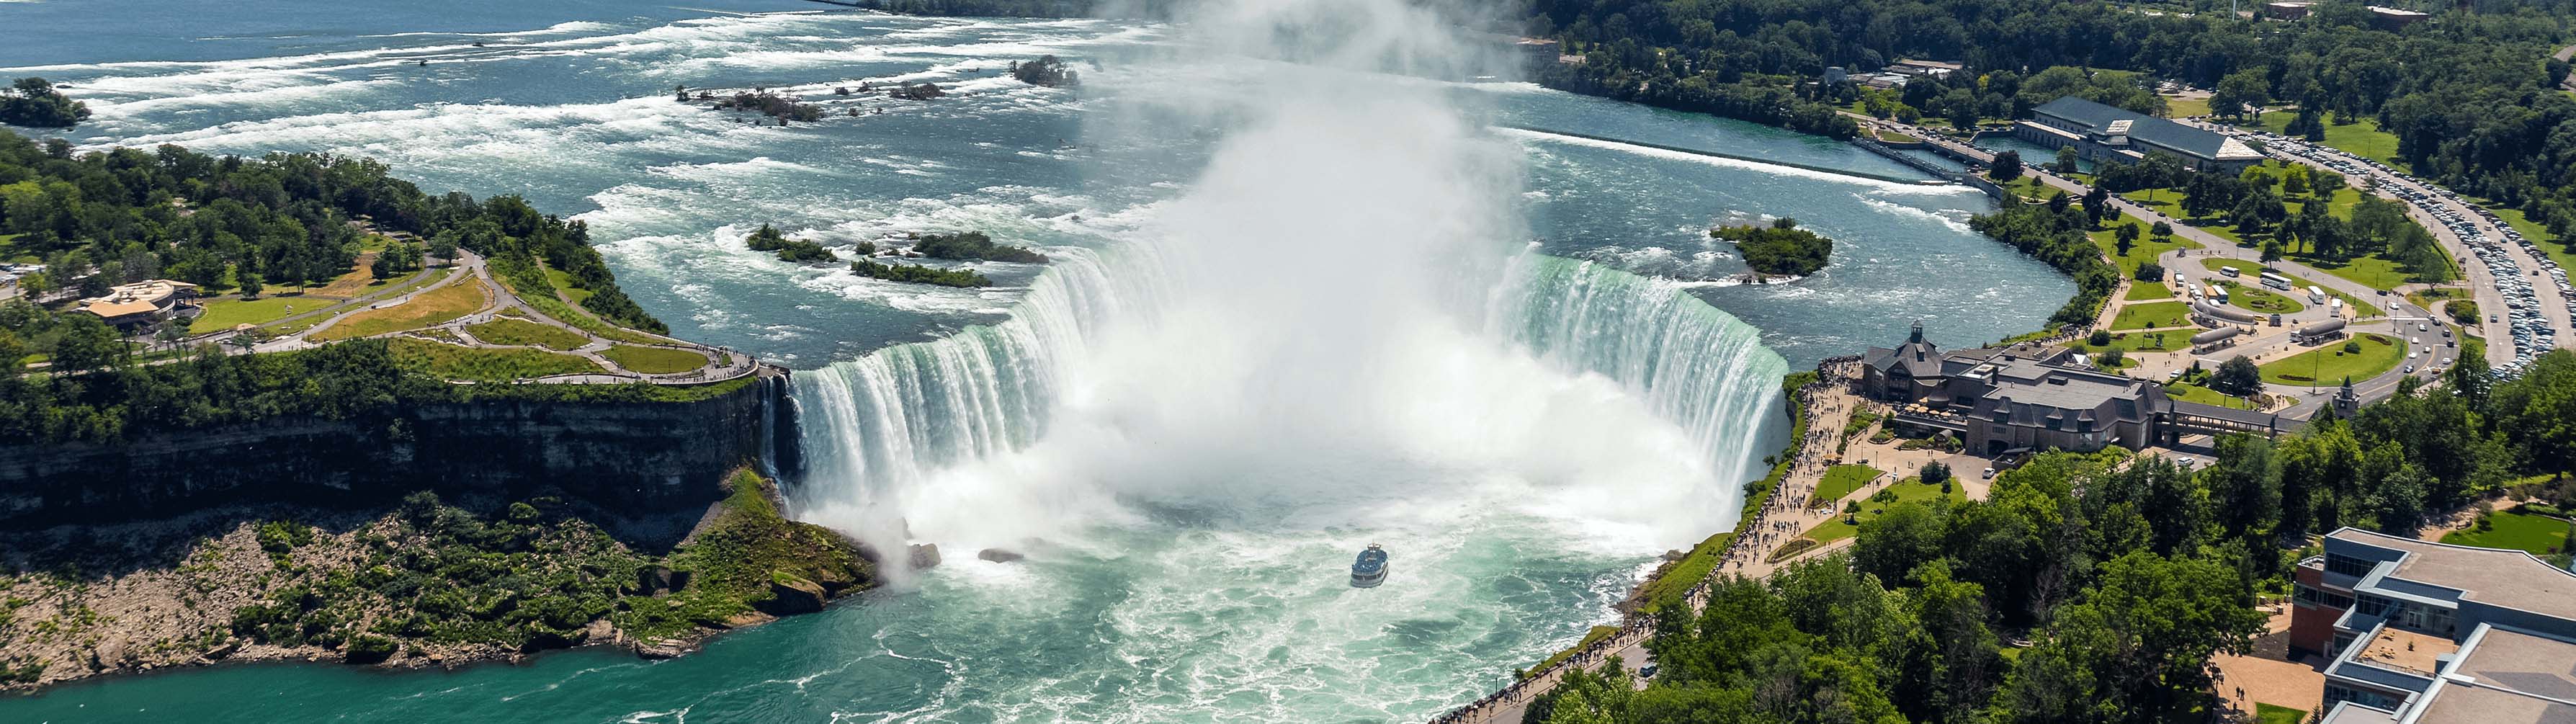 The iconic waters of Niagara Falls on a clear, warm day.